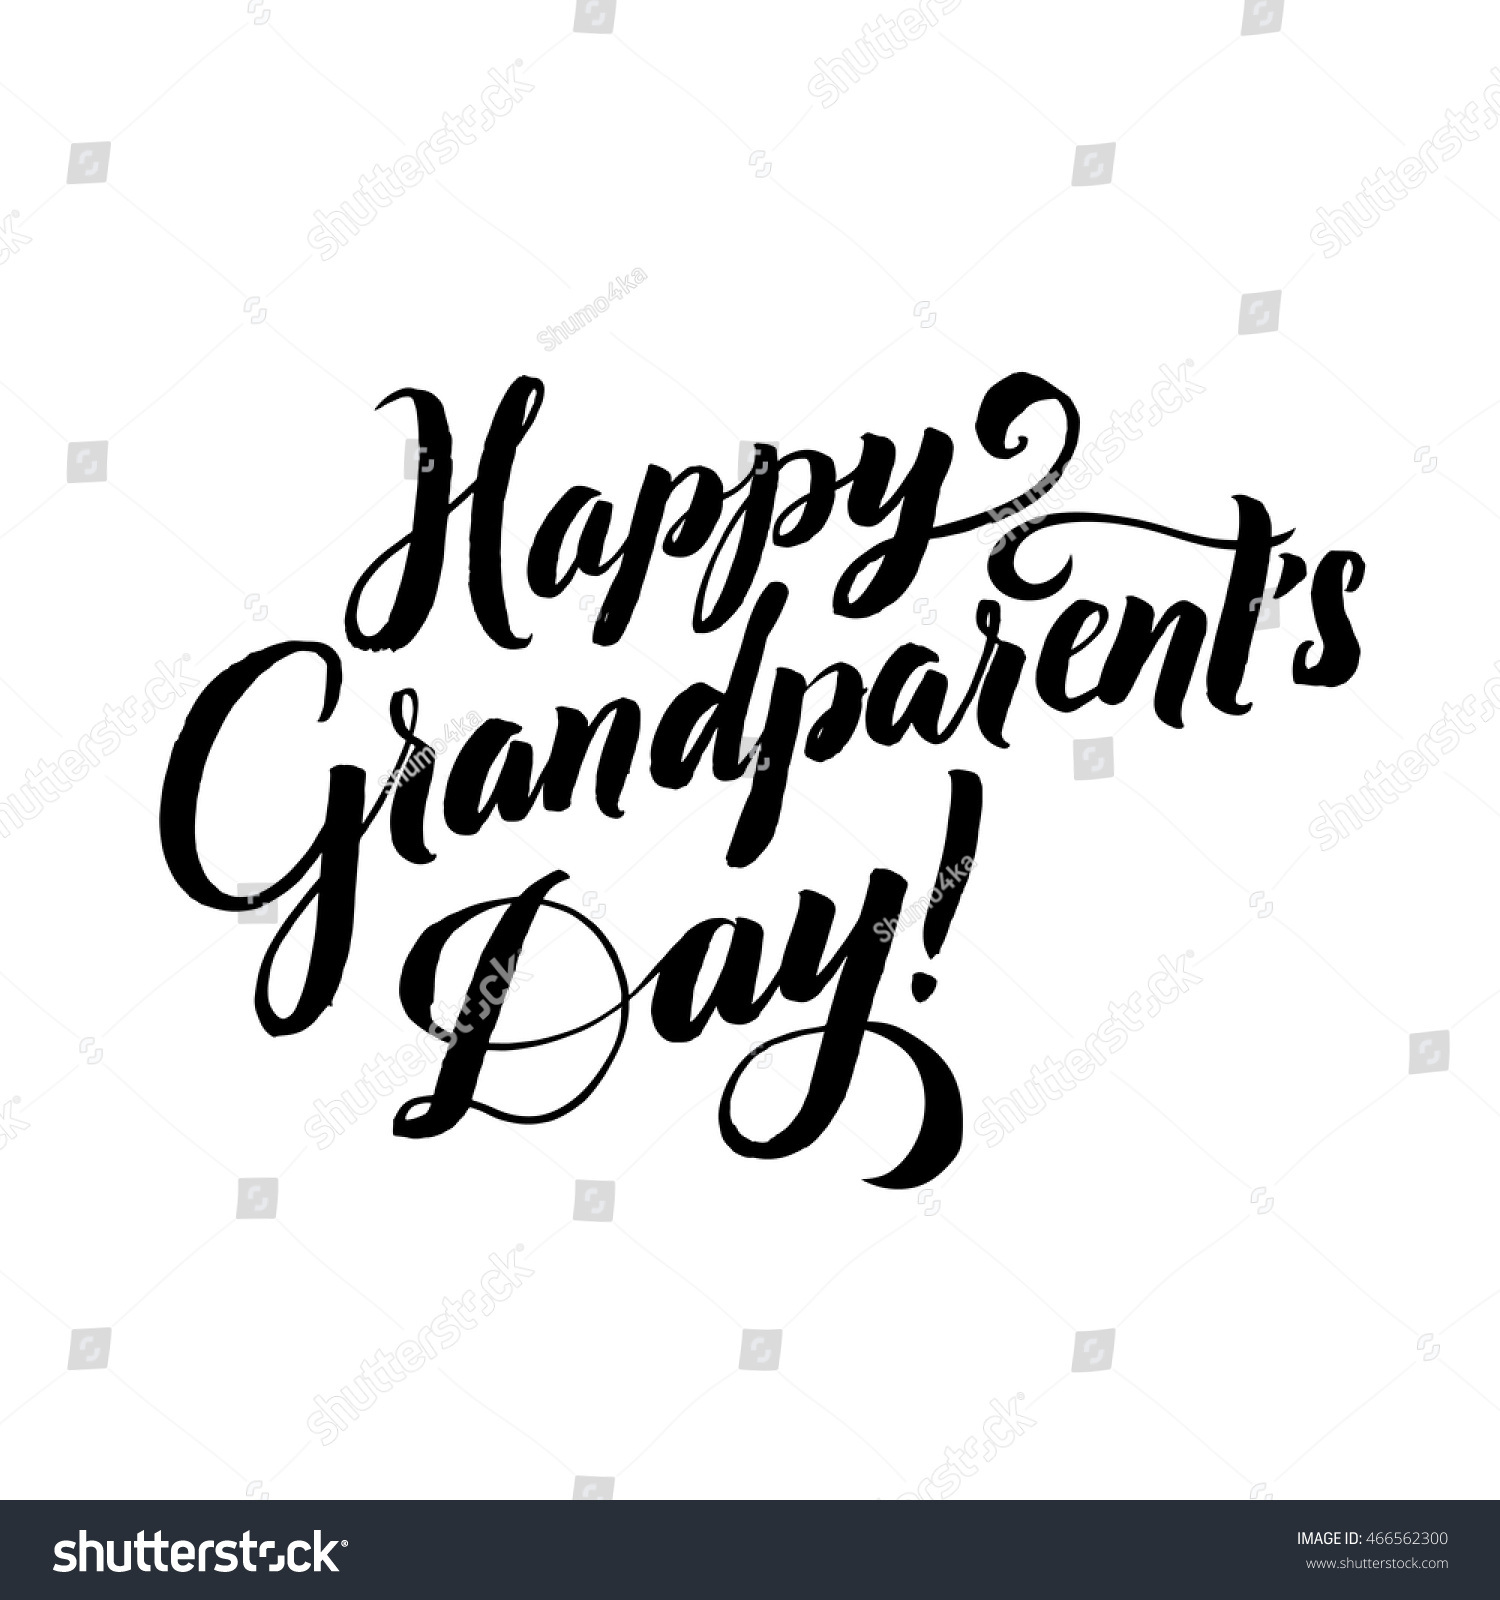 Download Best Grandpa Happy Grandparents Day Calligraphy Stock Vector Royalty Free 466562300